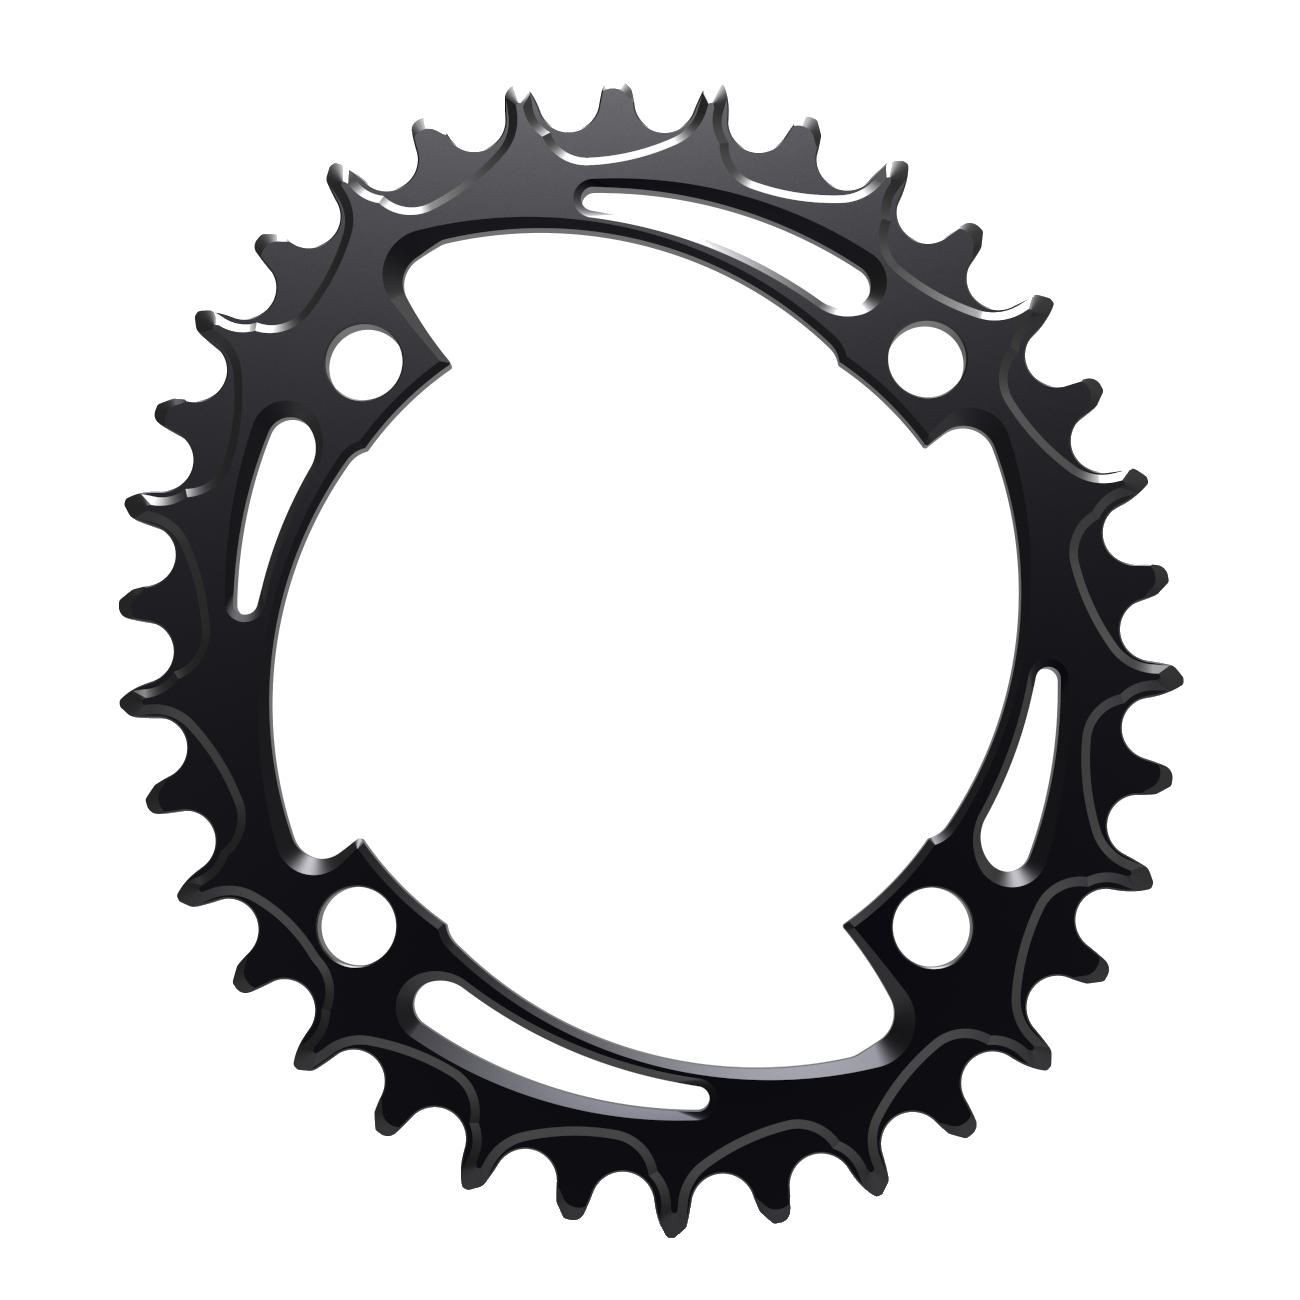 Image of Alugear Narrow Wide Chainring - Oval - 104 BCD - 4-Bolt - black